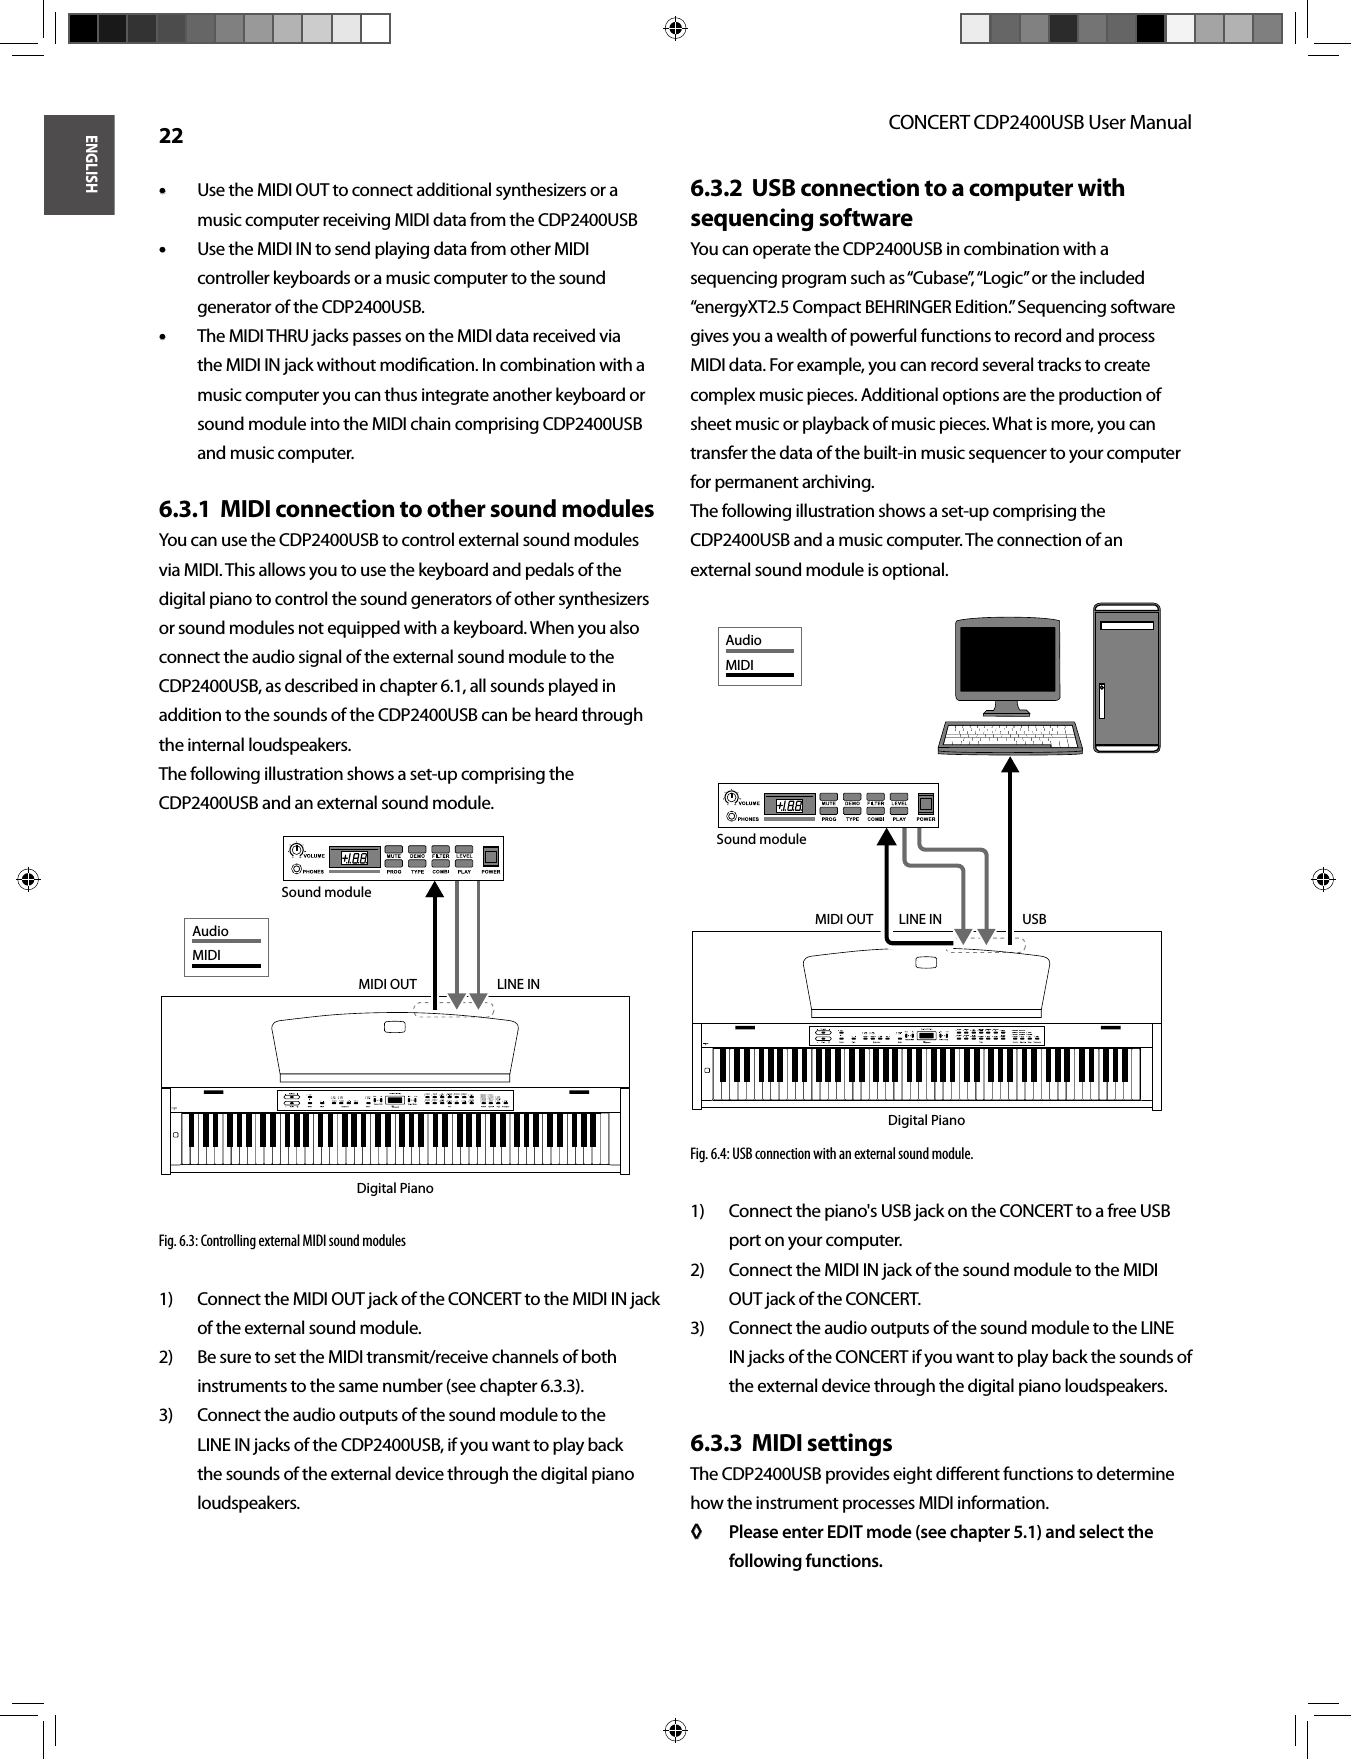 ENGLISHCONCERT CDP2400USB User Manual 22Use the MIDI OUT to connect additional synthesizers or a • • music computer receiving MIDI data from the CDP2400USBUse the MIDI IN to send playing data from other MIDI • • controller keyboards or a music computer to the sound generator of the CDP2400USB.The MIDI THRU jacks passes on the MIDI data received via • • the MIDI IN jack without modiﬁ cation. In combination with a music computer you can thus integrate another keyboard or sound module into the MIDI chain comprising CDP2400USB and music computer.MIDI connection to other sound modules6.3.1  You can use the CDP2400USB to control external sound modules via MIDI. This allows you to use the keyboard and pedals of the digital piano to control the sound generators of other synthesizers or sound modules not equipped with a keyboard. When you also connect the audio signal of the external sound module to the CDP2400USB, as described in chapter 6.1, all sounds played in addition to the sounds of the CDP2400USB can be heard through the internal loudspeakers.The following illustration shows a set-up comprising the CDP2400USB and an external sound module.Fig. 6.3: Controlling external MIDI sound modulesConnect the MIDI OUT jack of the CONCERT to the MIDI IN jack 1) of the external sound module.Be sure to set the MIDI transmit/receive channels of both 2) instruments to the same number (see chapter 6.3.3).Connect the audio outputs of the sound module to the 3) LINE IN jacks of the CDP2400USB, if you want to play back the sounds of the external device through the digital piano loudspeakers.USB connection to a computer with 6.3.2  sequencing softwareYou can operate the CDP2400USB in combination with a sequencing program such as “Cubase”, “Logic” or the included “energyXT2.5 Compact BEHRINGER Edition.” Sequencing software gives you a wealth of powerful functions to record and process MIDI data. For example, you can record several tracks to create complex music pieces. Additional options are the production of sheet music or playback of music pieces. What is more, you can transfer the data of the built-in music sequencer to your computer for permanent archiving.The following illustration shows a set-up comprising the CDP2400USB and a music computer. The connection of anexternal sound module is optional.Fig. 6.4: USB connection with an external sound module. Connect the piano&apos;s USB jack on the CONCERT to a free USB 1) port on your computer. Connect the MIDI IN jack of the sound module to the MIDI 2) OUT jack of the CONCERT. Connect the audio outputs of the sound module to the LINE 3) IN jacks of the CONCERT if you want to play back the sounds of the external device through the digital piano loudspeakers. MIDI settings6.3.3  The CDP2400USB provides eight diﬀ erent functions to determine how the instrument processes MIDI information.Please enter EDIT mode (see chapter 5.1) and select the ◊ ◊ following functions.LINE INMIDI OUTDigital PianoSound moduleAudioMIDIDigital PianoUSBSound moduleLINE INMIDI OUTAudioMIDI